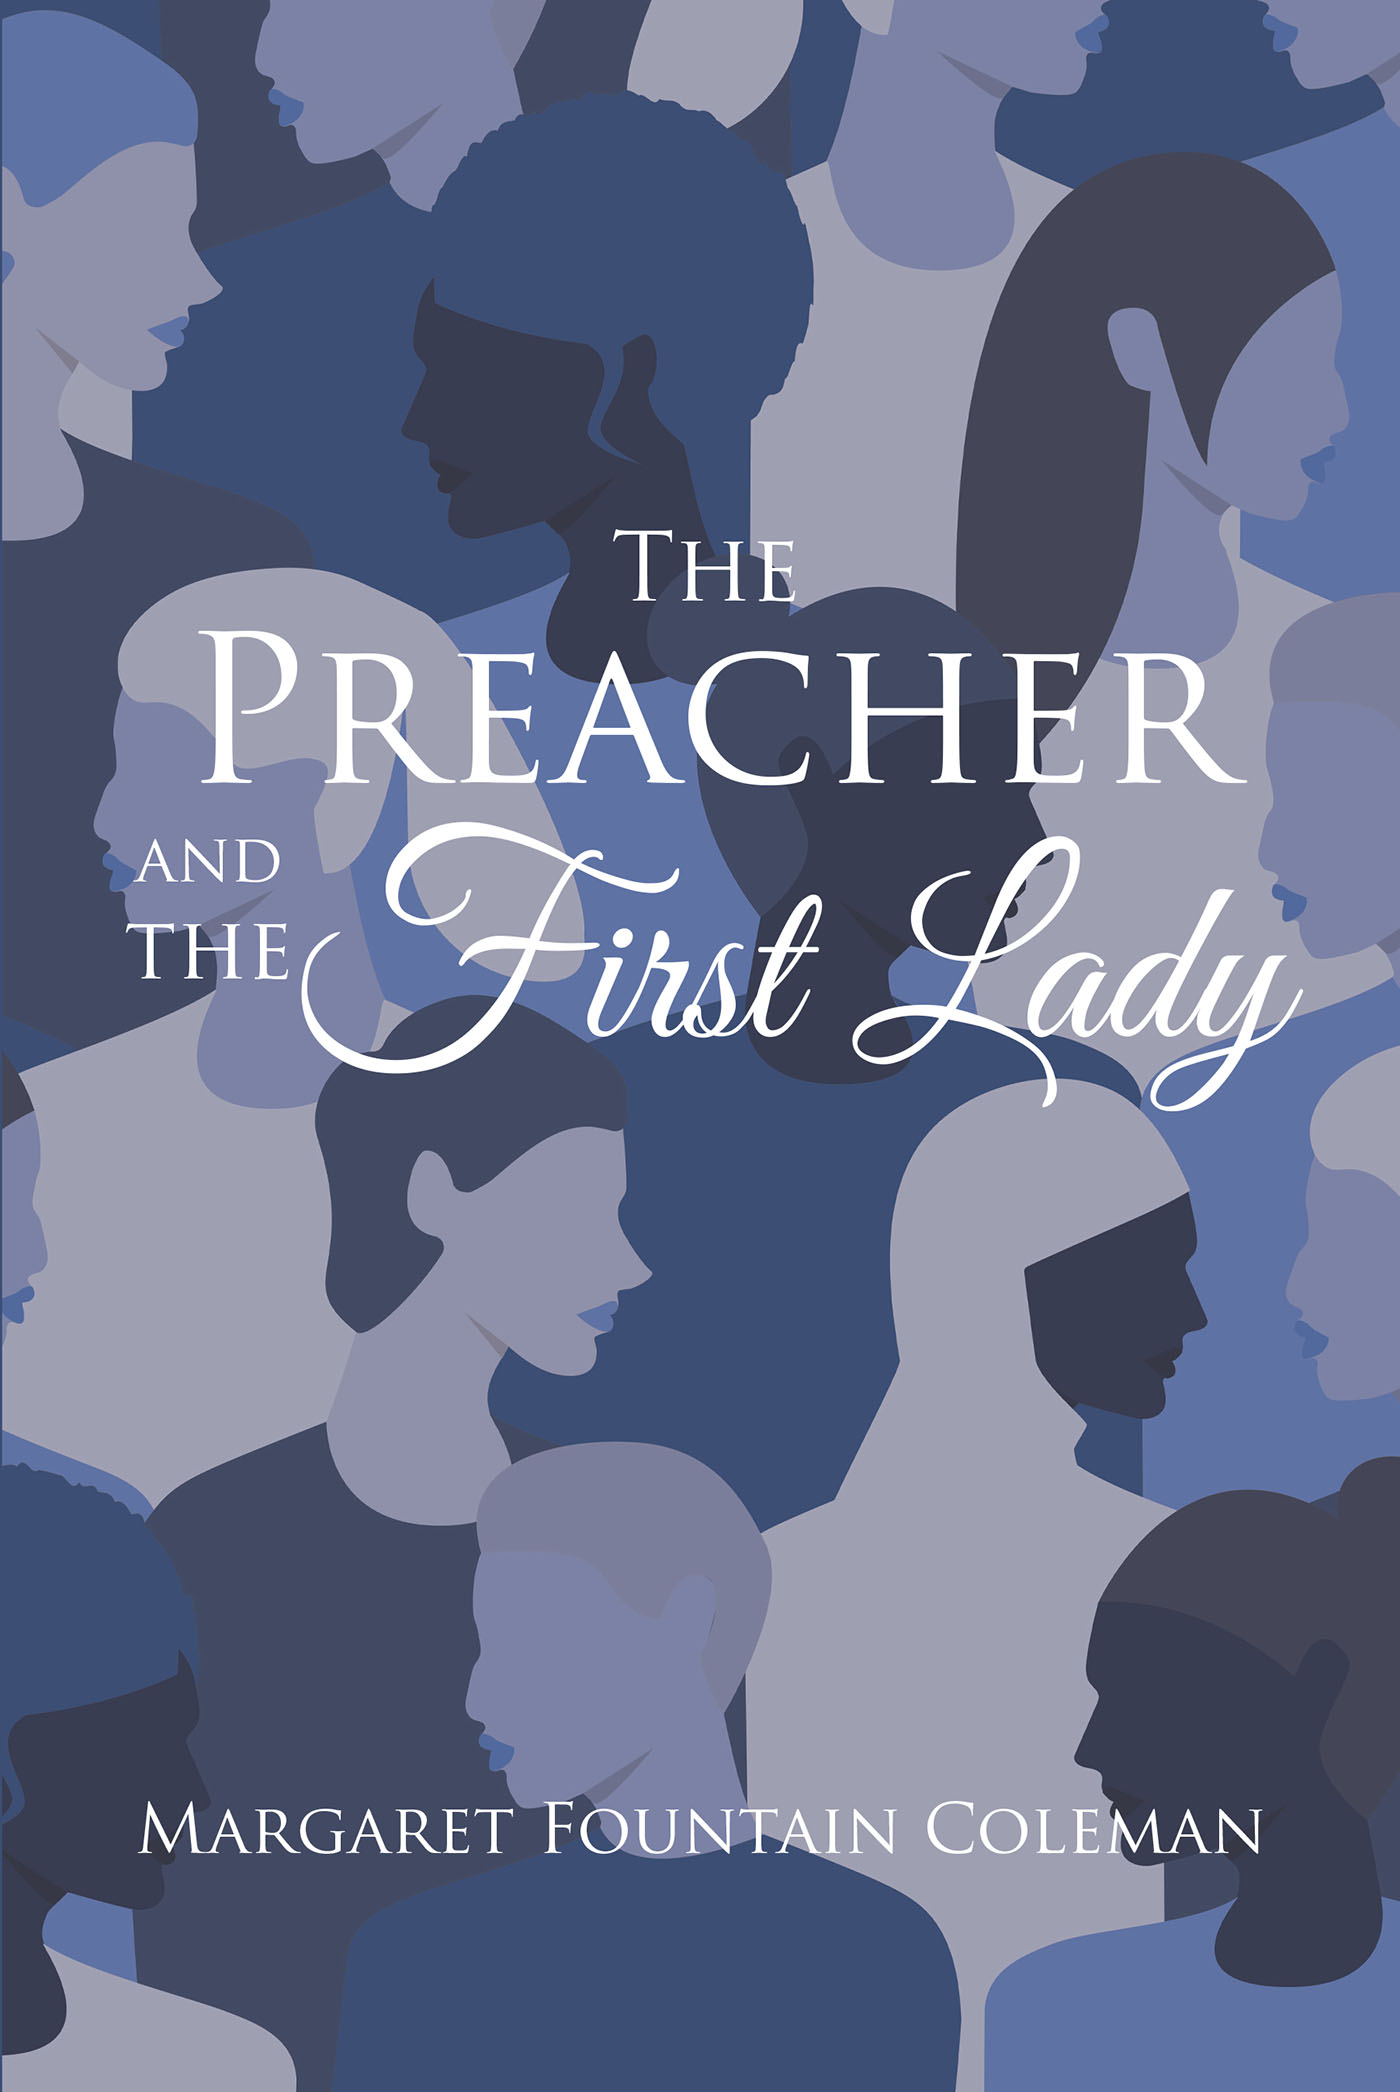 Margaret Fountain Coleman’s Newly Released "The Preacher and the First Lady" is a Collection of Stories That Raise Awareness of Personal and Spiritual Challenges